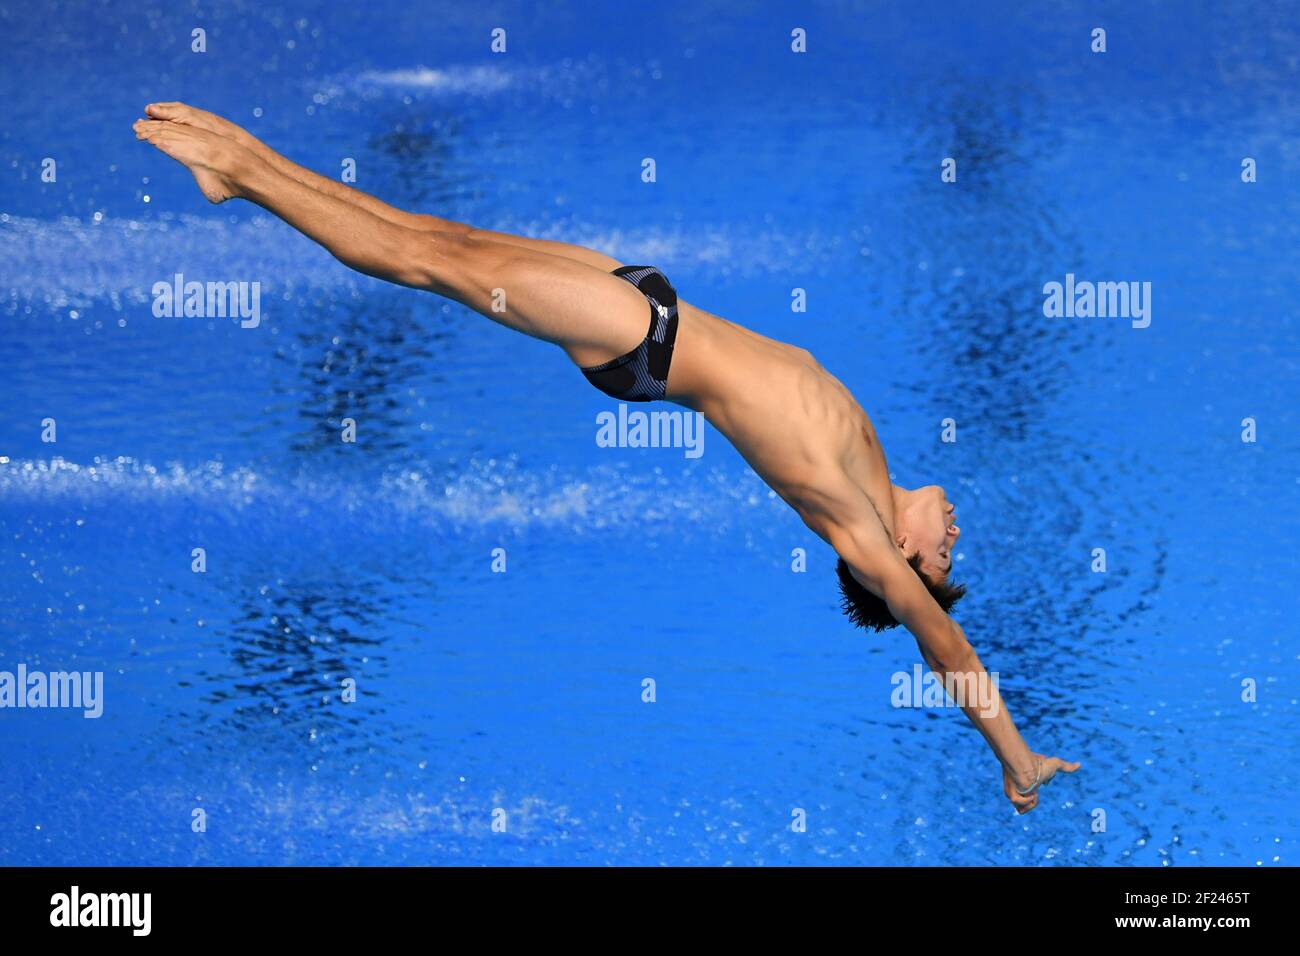 Jules Bouyer (Fra) competes in men's diving springboard during the Youth Olympic Games at Buenos Aires in Argentina, Day 9, October 14, 2018, Photo Philippe Millereau / KMSP / DPPI Stock Photo